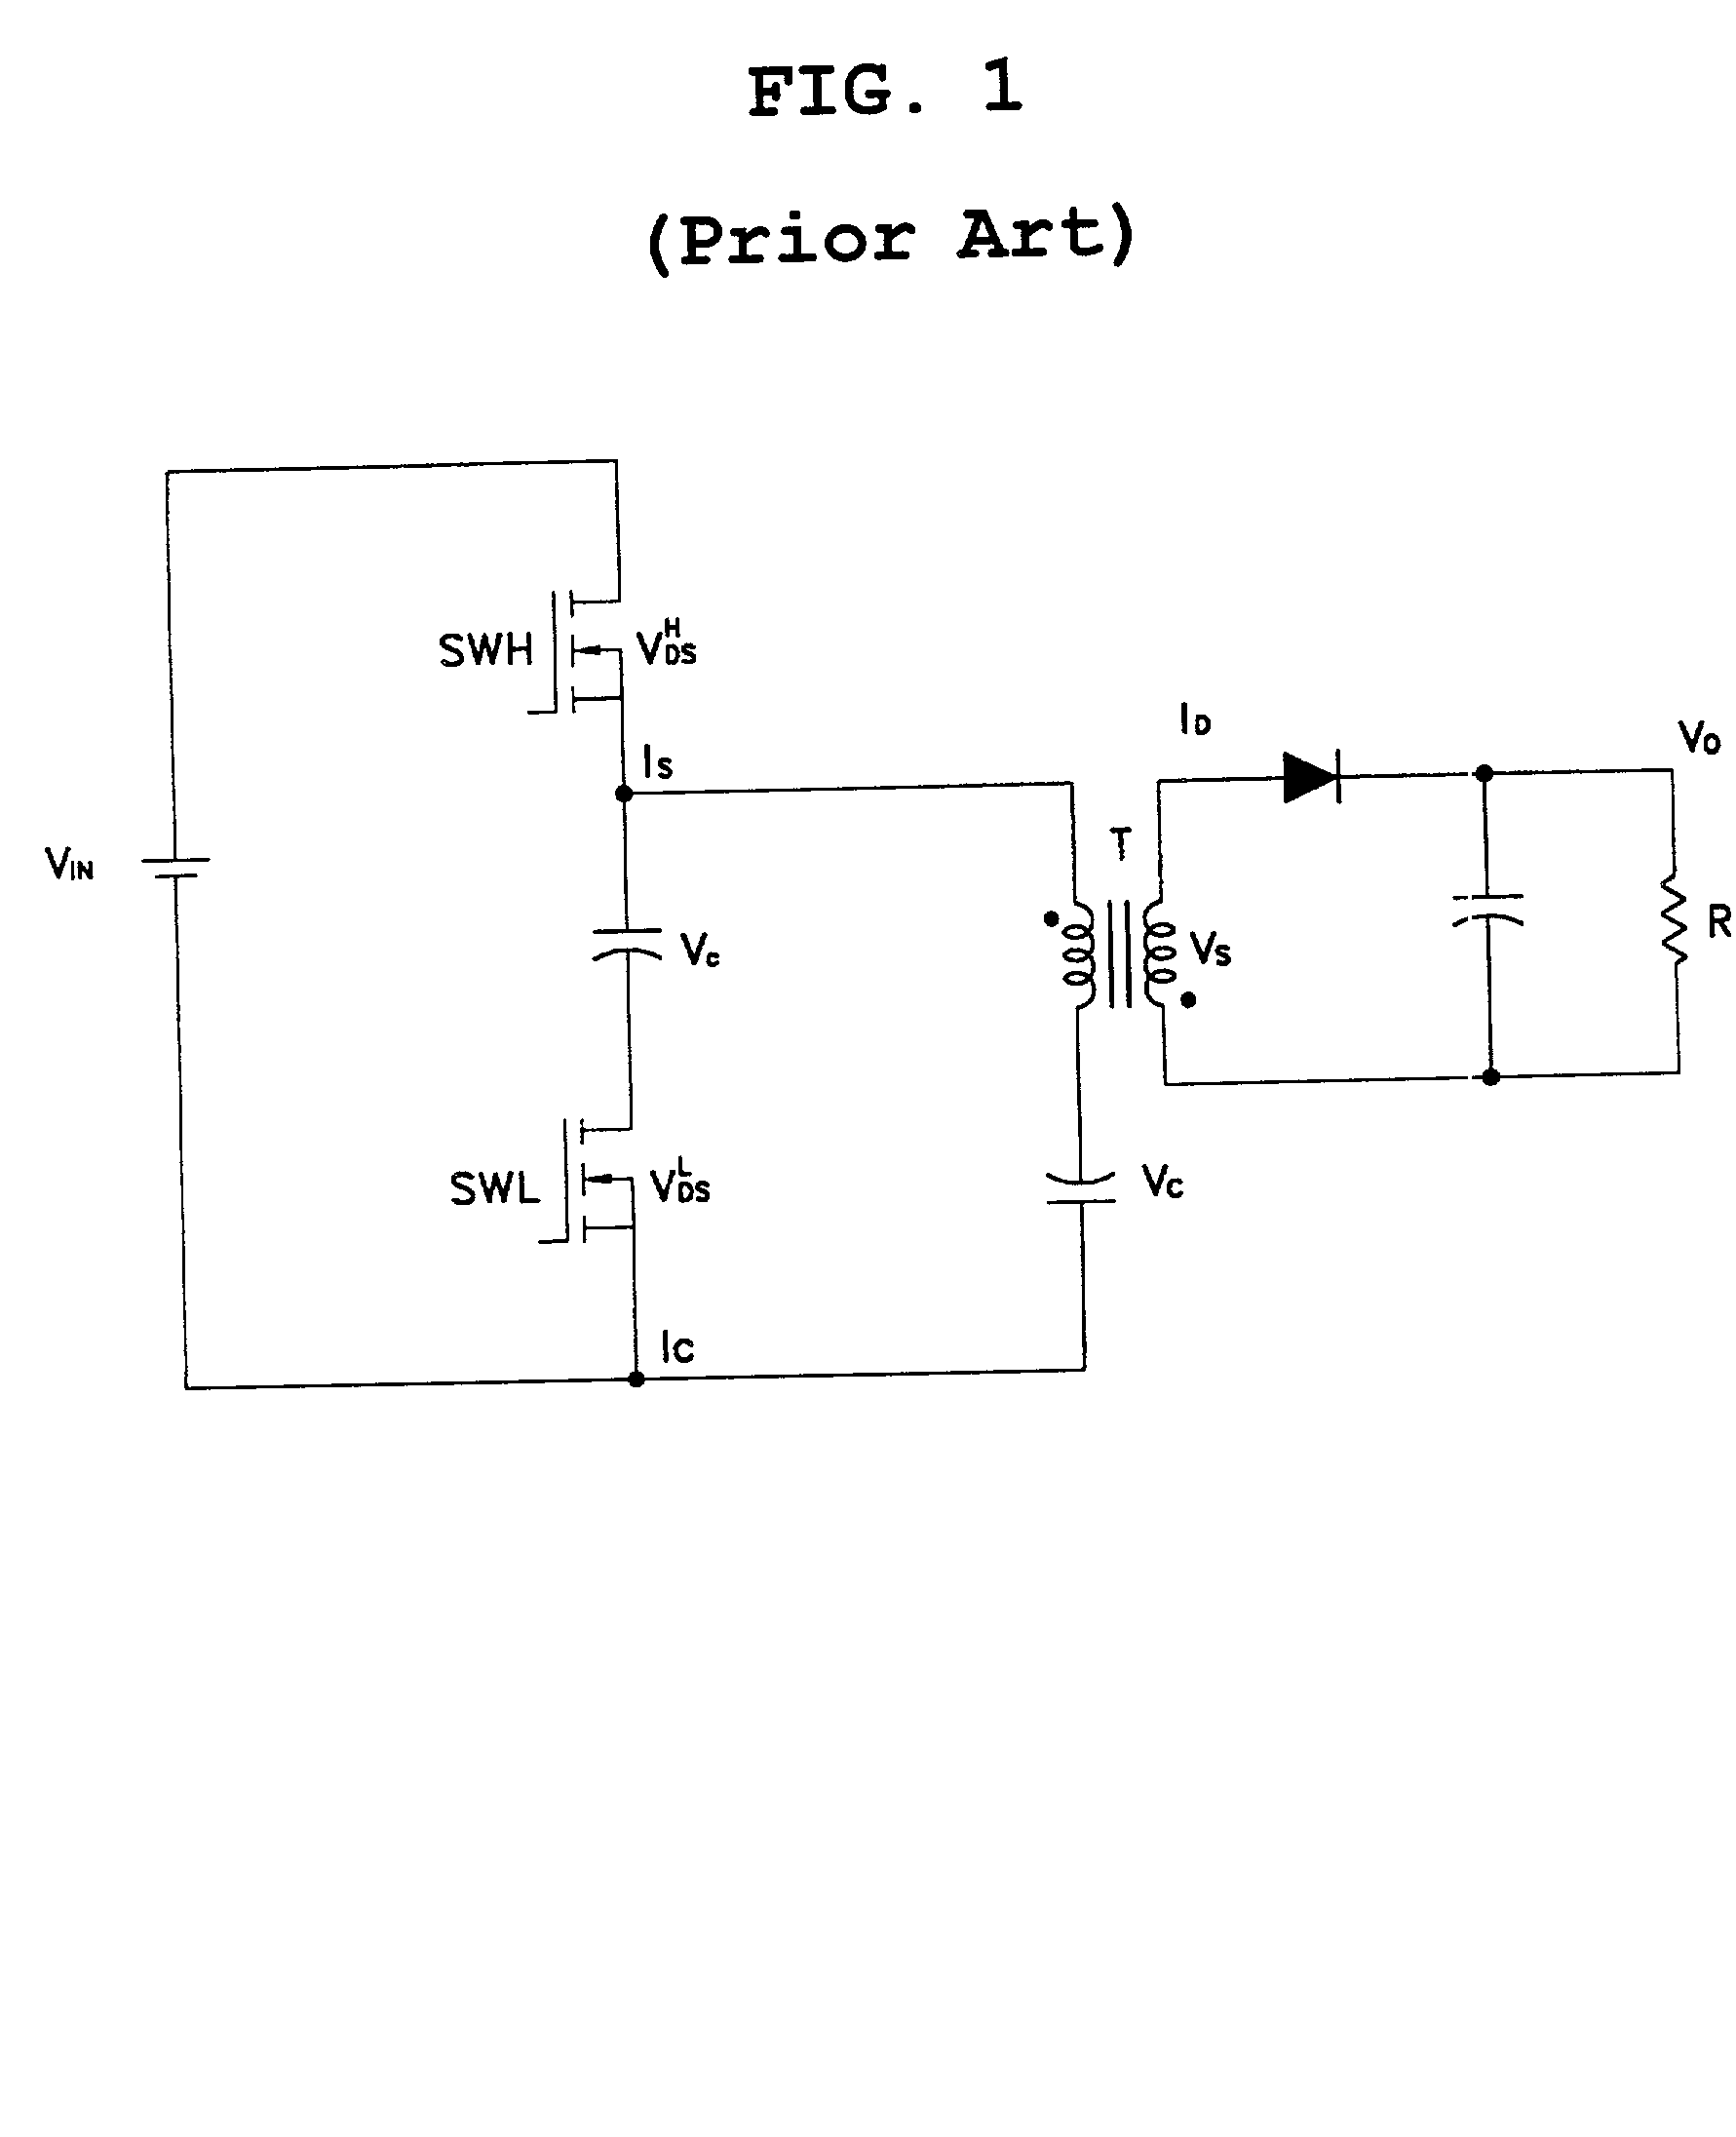 High efficiency converter for zero voltage switching